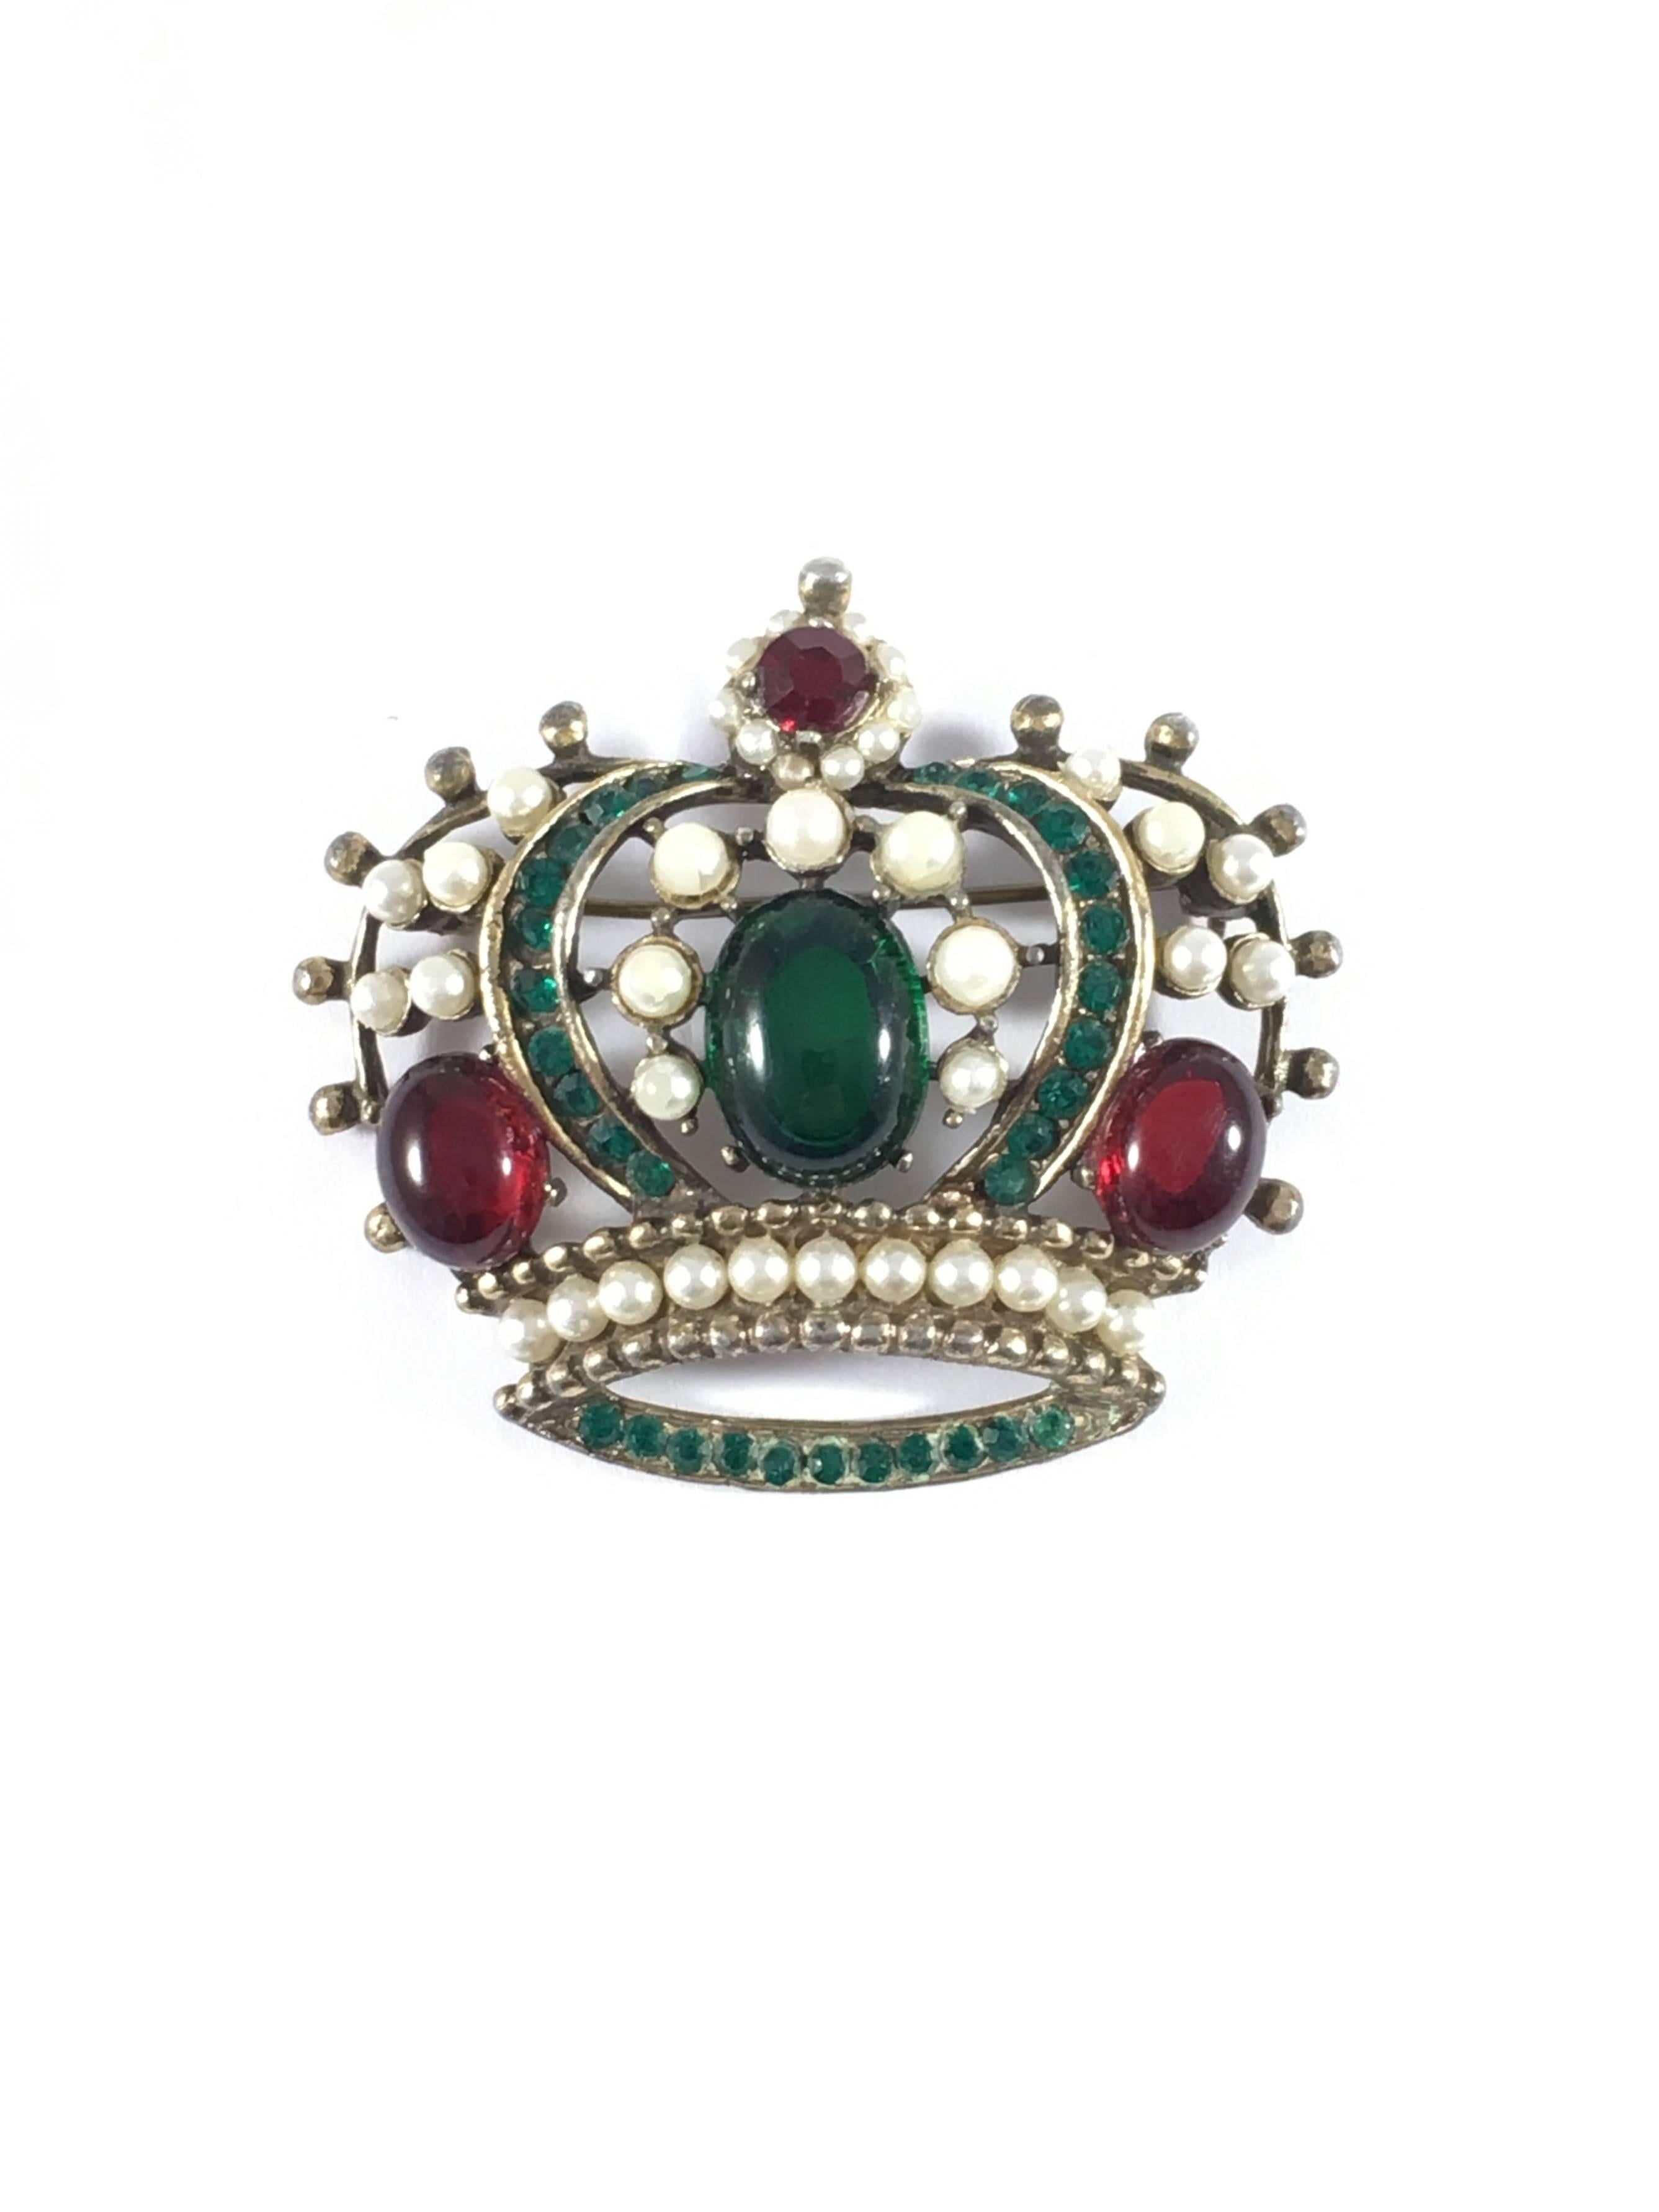 This is a 1950s Weiss crown brooch pendant made out of a gold-toned metal embellished with red and green glass stones, rhinestones and faux pearls. The brooch measures 2 inches wide x 1 3/4 inches high. It is marked 'Weiss' on a plaque located on